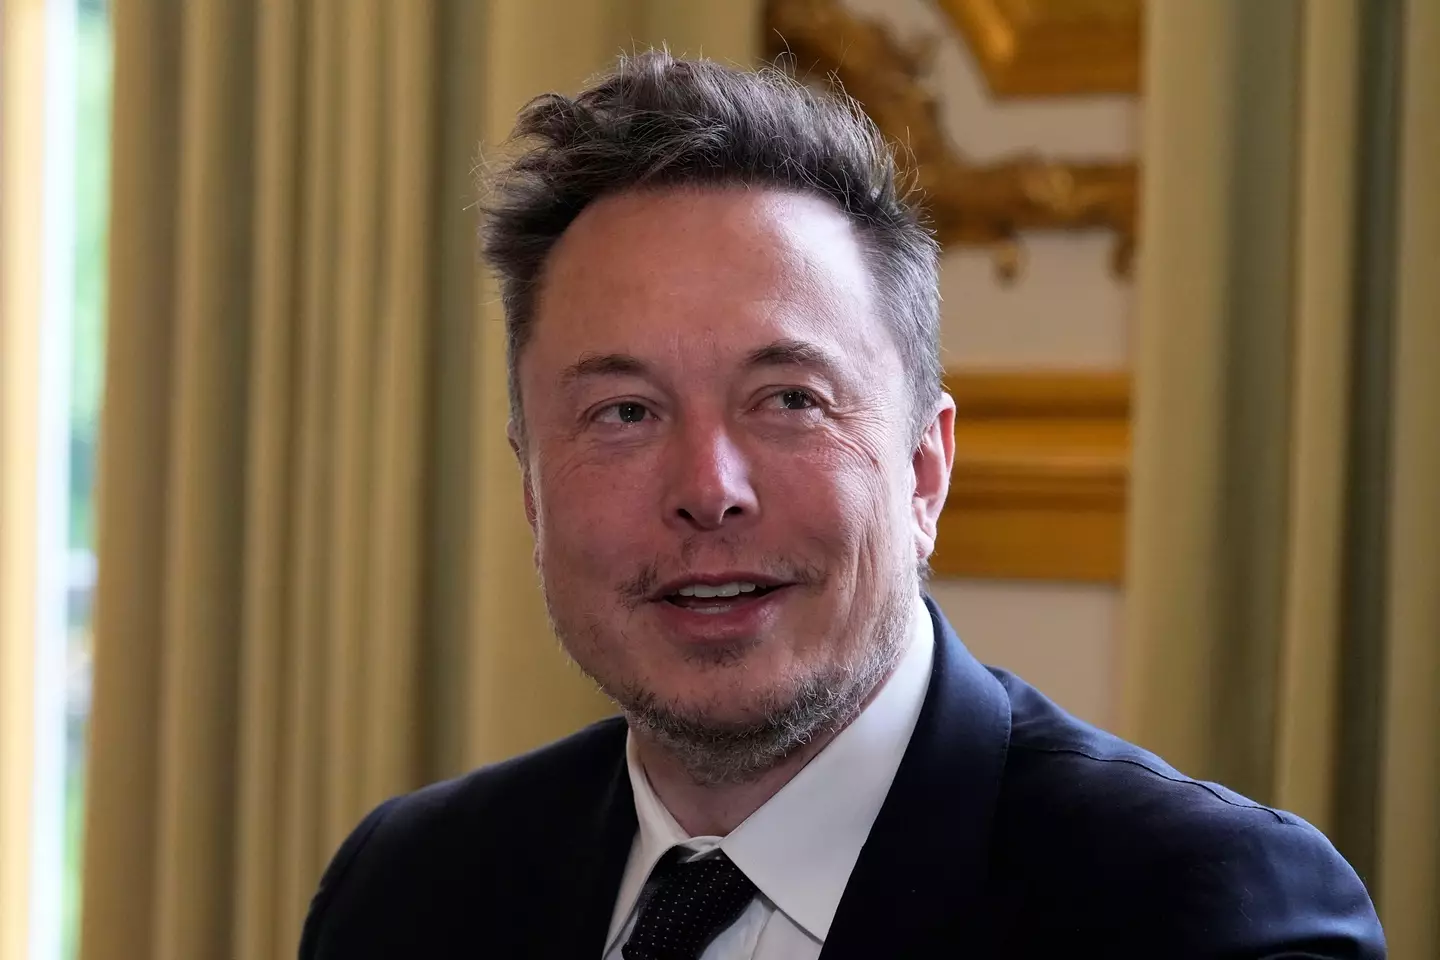 Elon Musk has argued that there's a chance that AI could spell bad news for humans.